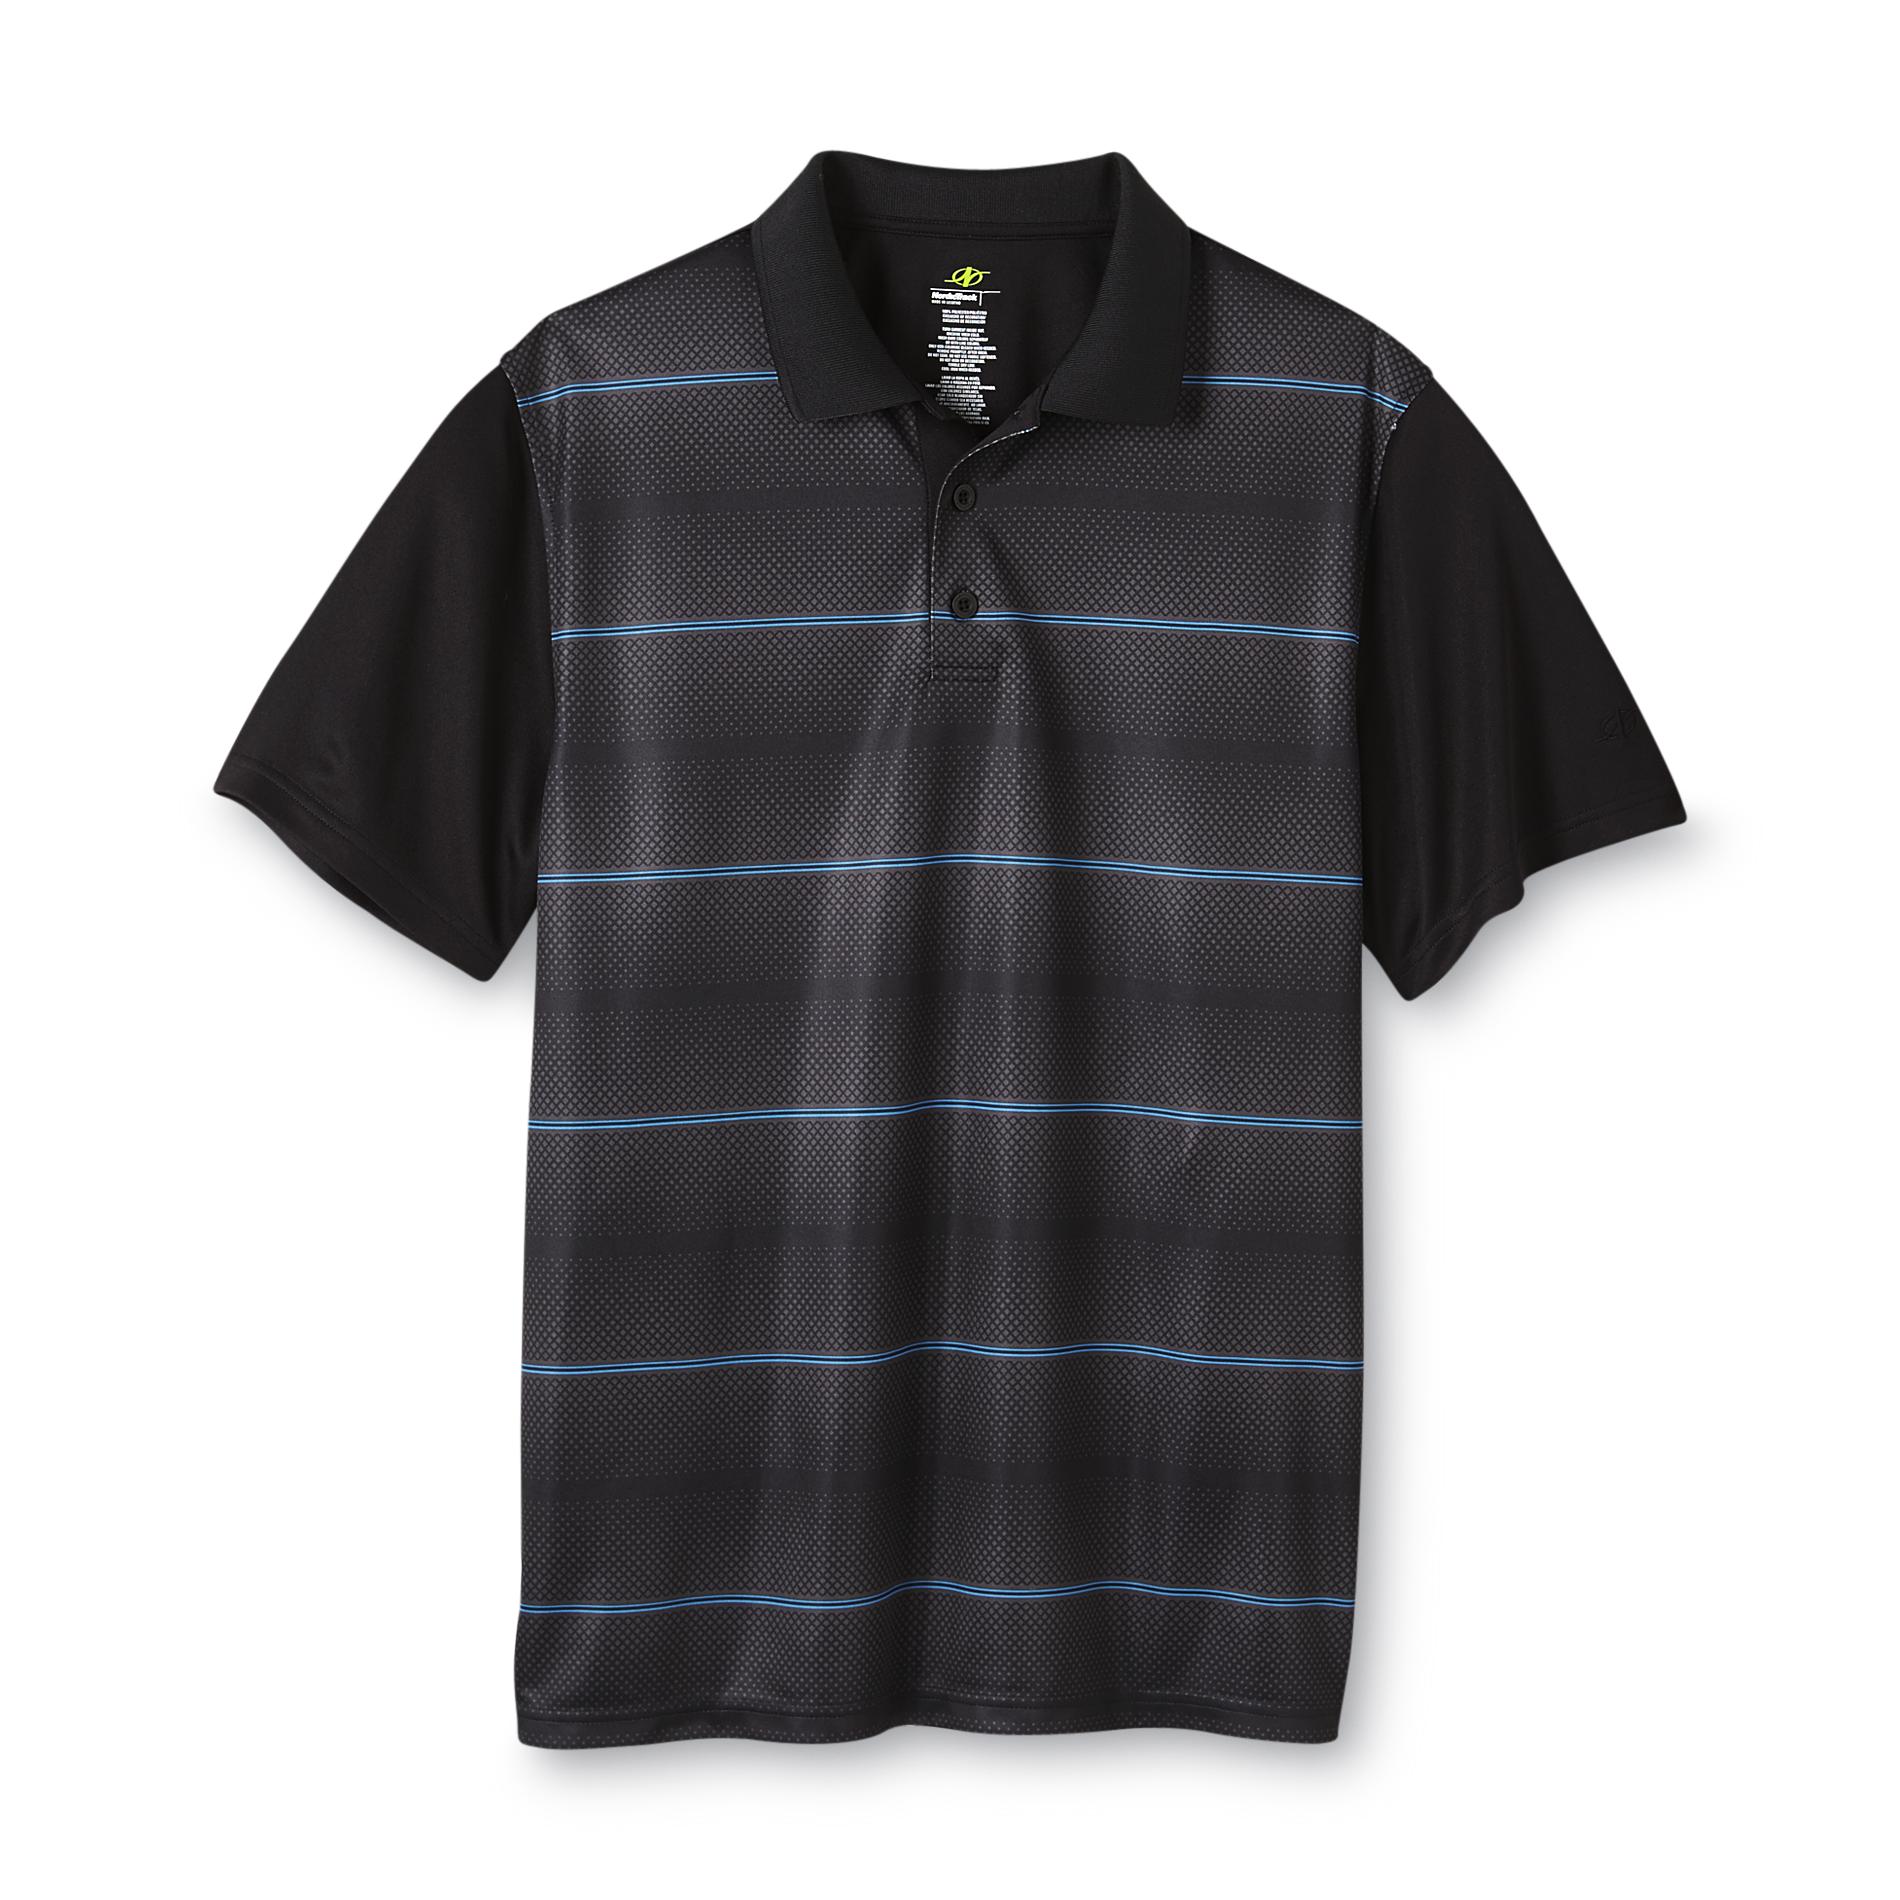 NordicTrack Men's Big & Tall Polo Shirt - Striped